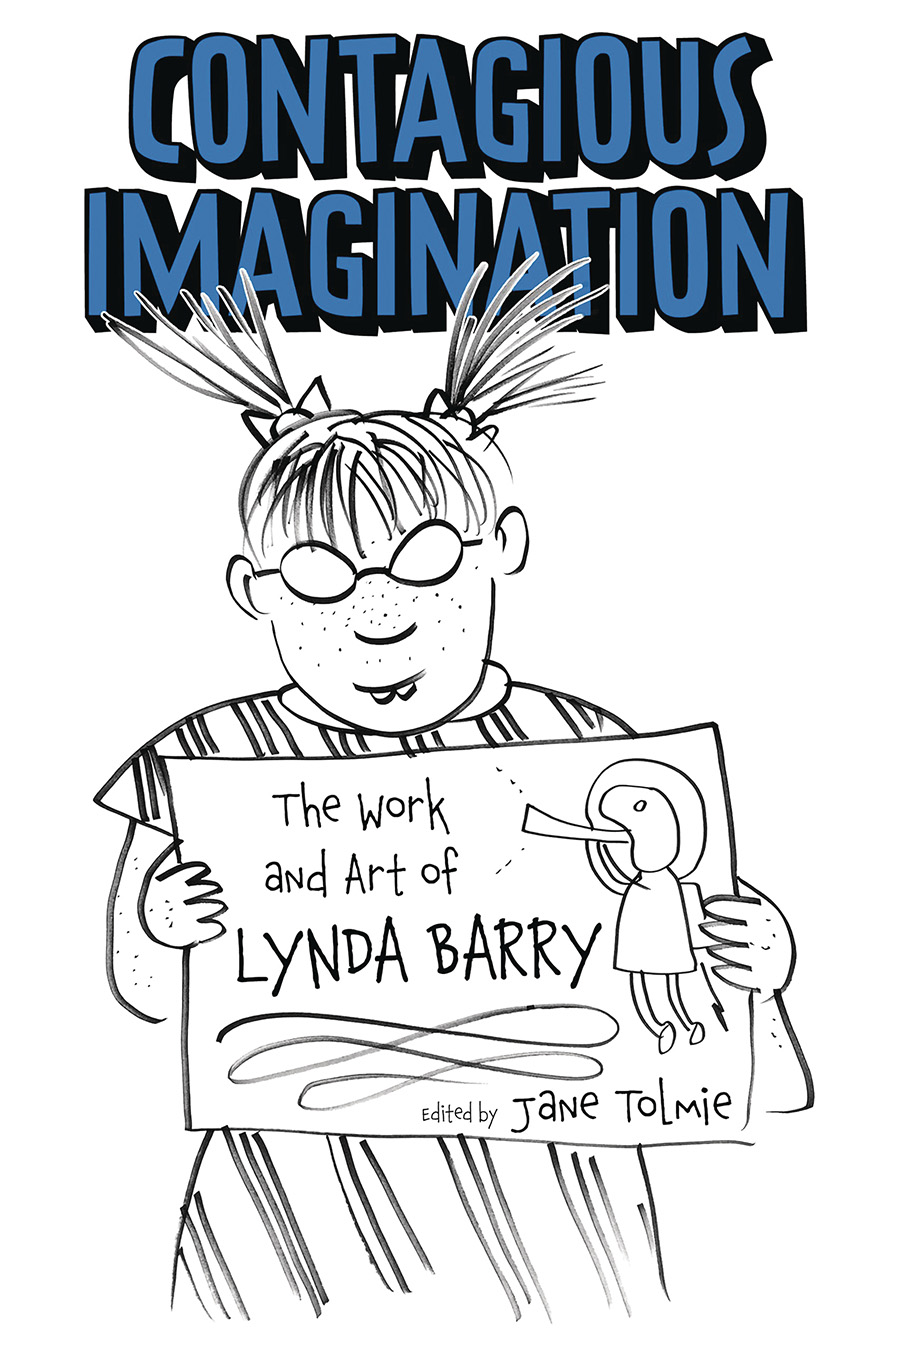 Contagious Imagination Work And Art Of Lynda Barry SC